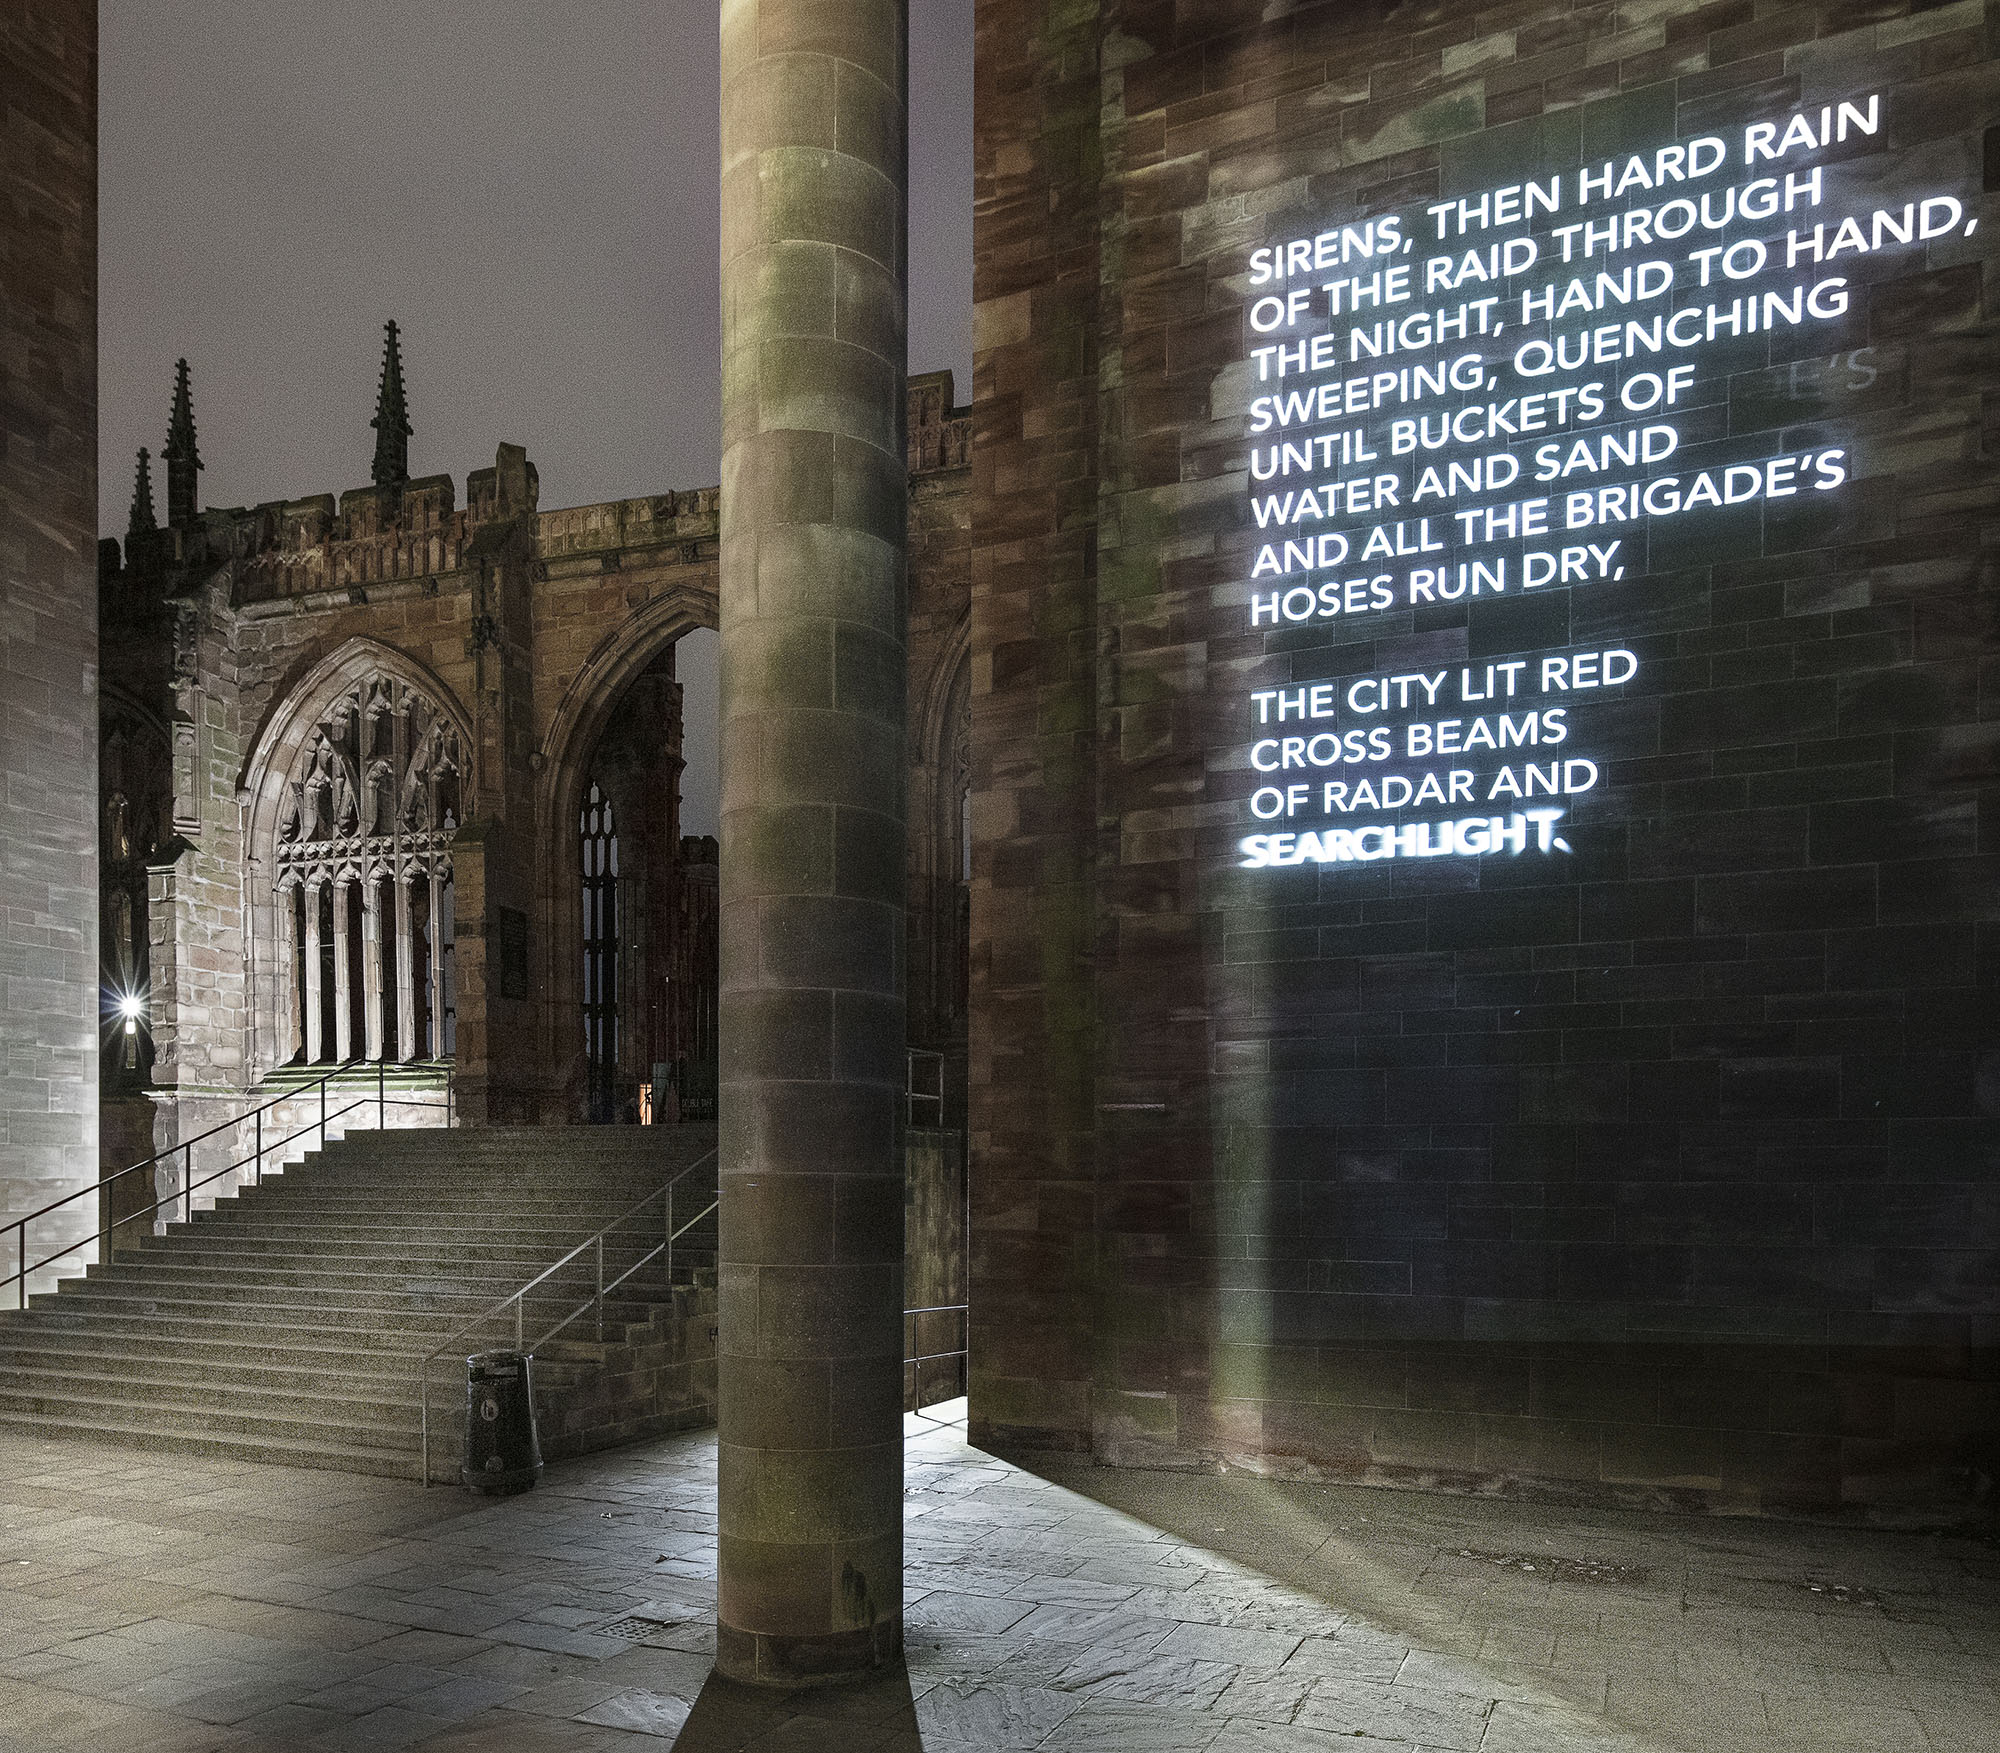 Words from poem projected onto wall of the cathedral